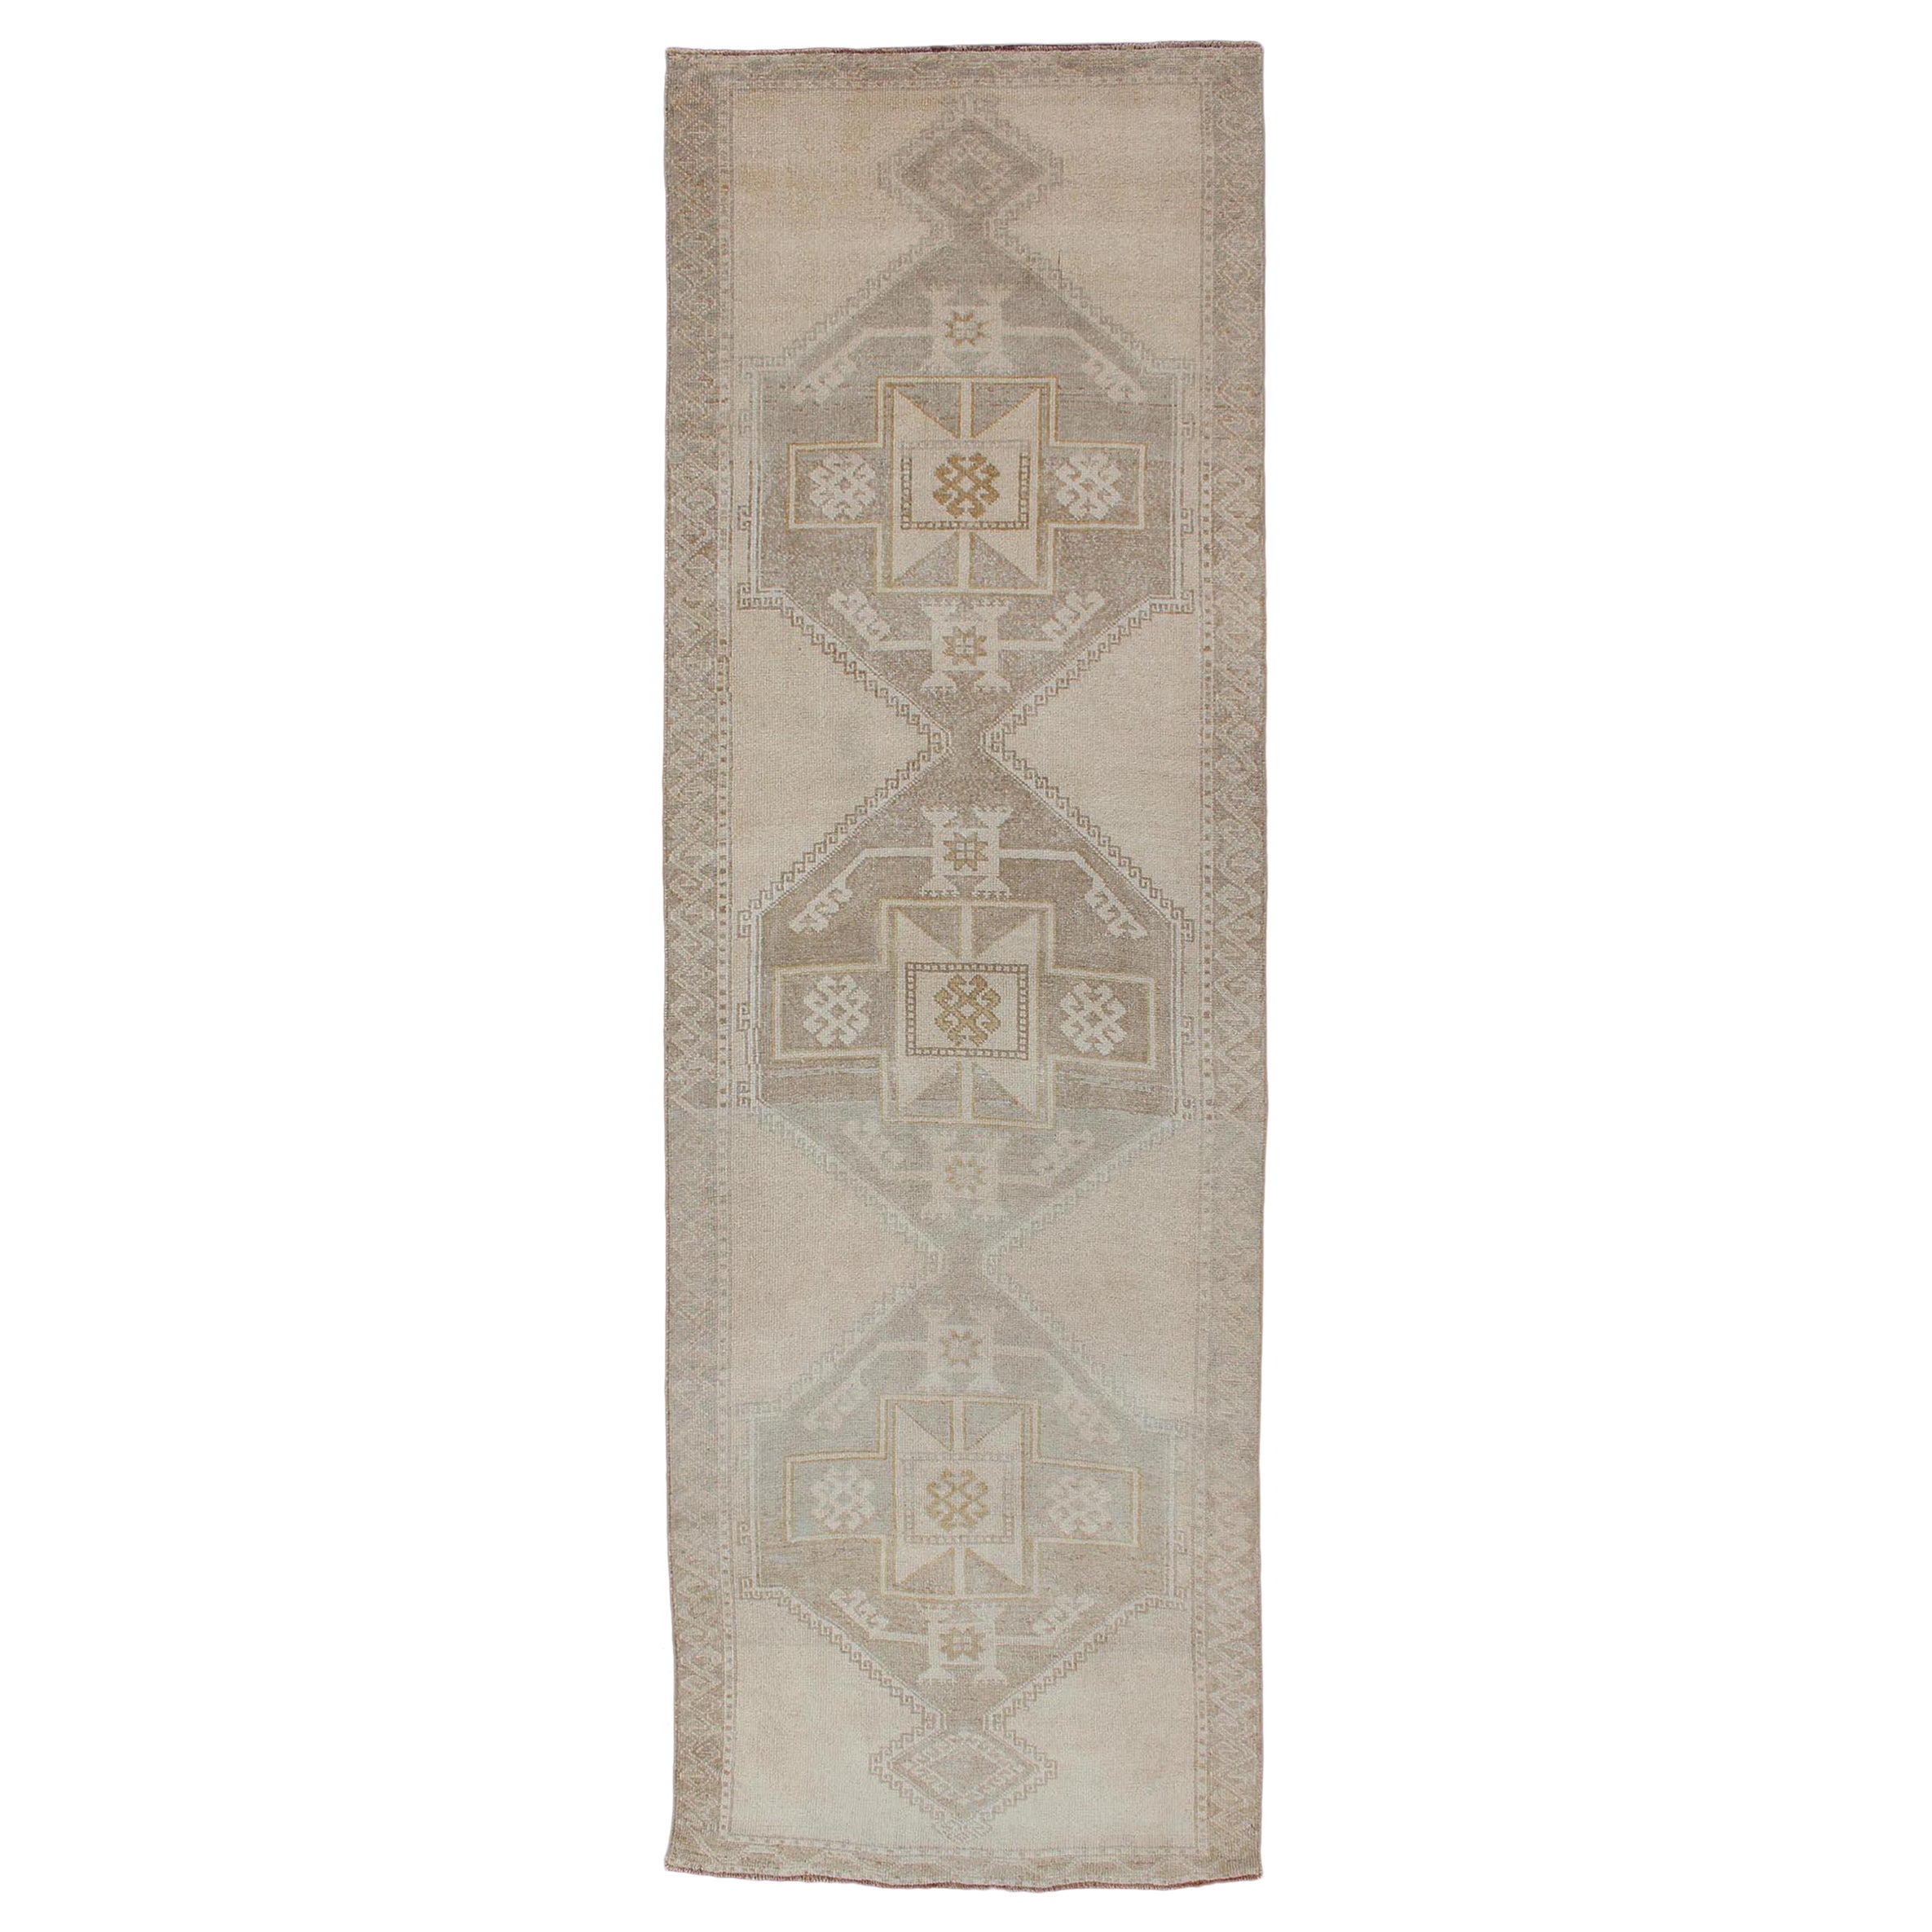 Vintage Turkish Oushak Runner with Etched Medallion Design in Soft Muted Tones